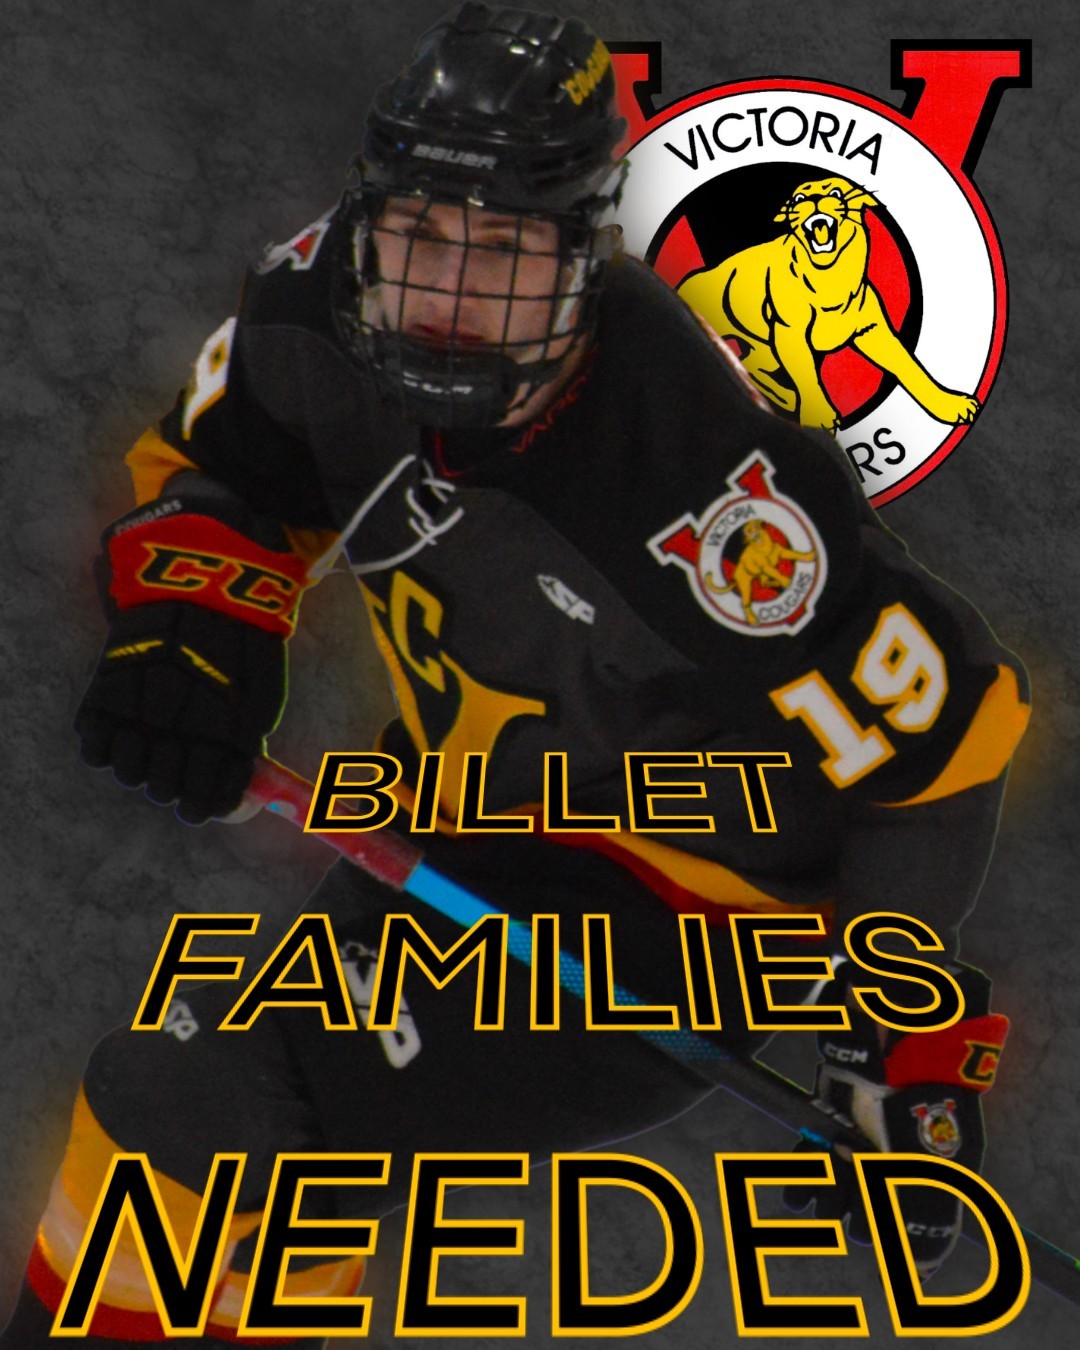 The Victoria Cougars are looking for billet homes for the upcoming Season!

Our players will be in need of homes from the end of August through the end of the season.

Please contact Tom Arlidge @ 250-882-9872 or by email tom.a@shaw.ca for more information.